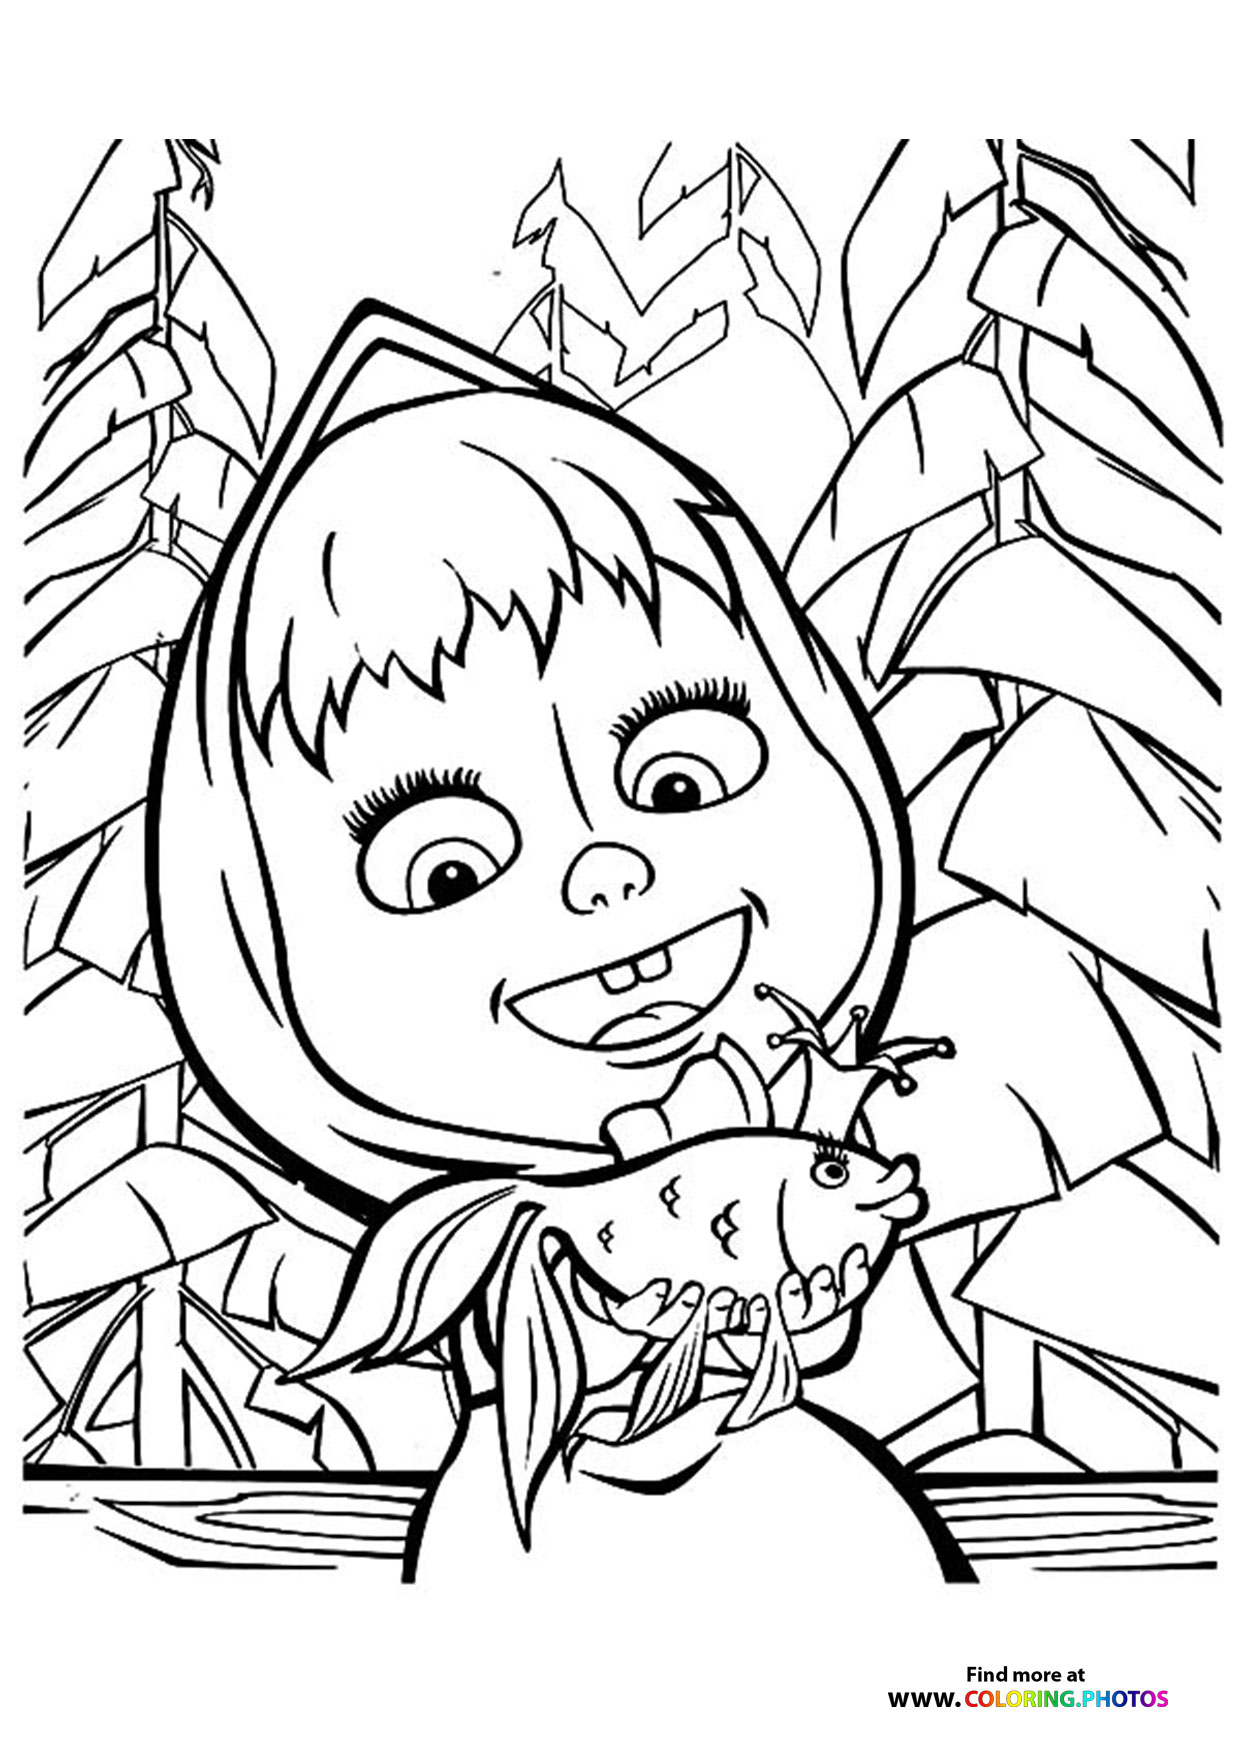 Masha with goldfish - Coloring Pages for kids